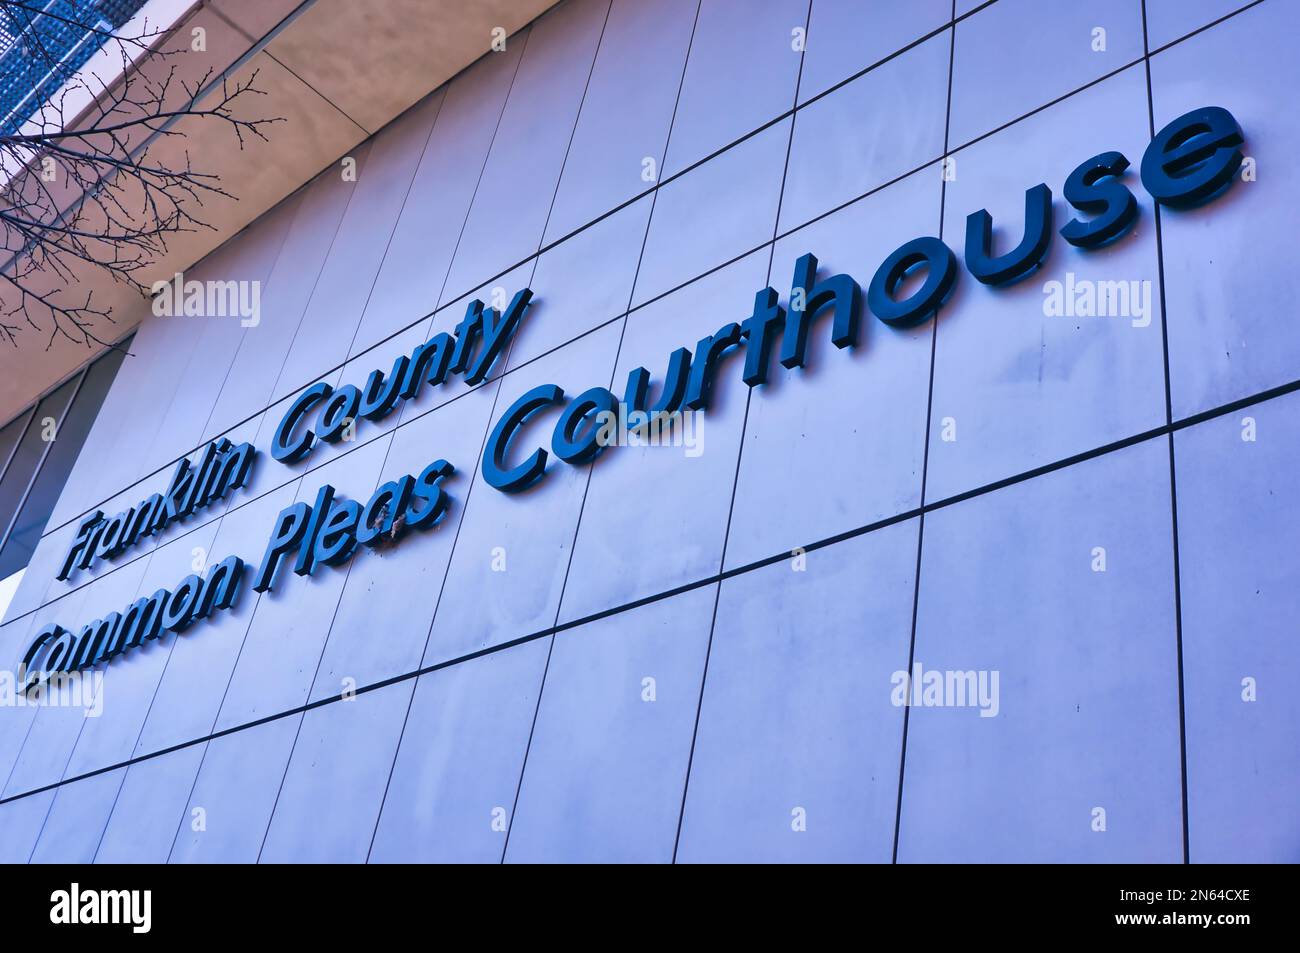 The Franklin County Court of Common Pleas - General Division Stock Photo